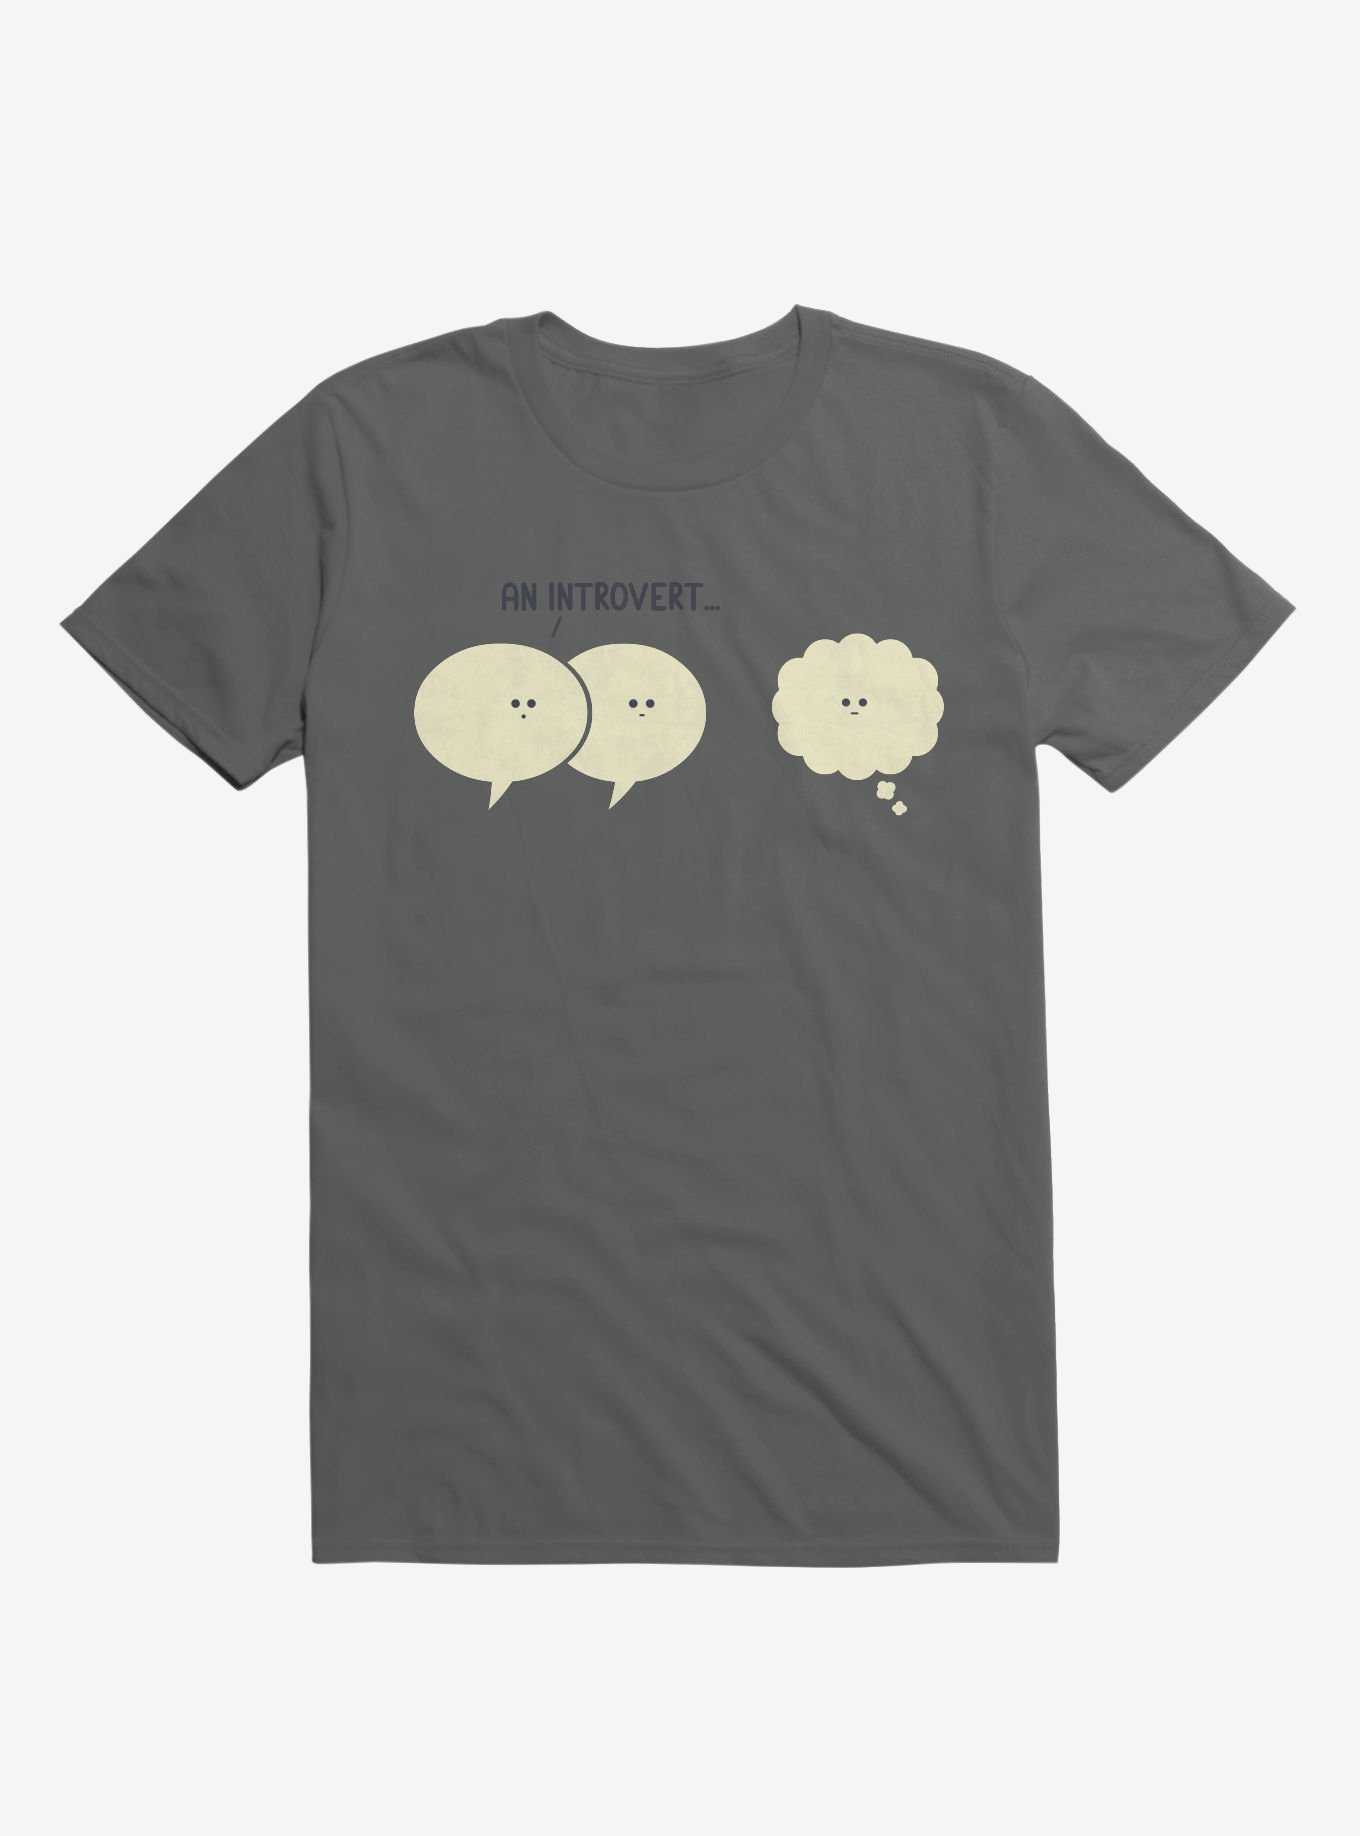 An Introvert... Speech And Thought Bubbles Charcoal Grey T-Shirt, , hi-res